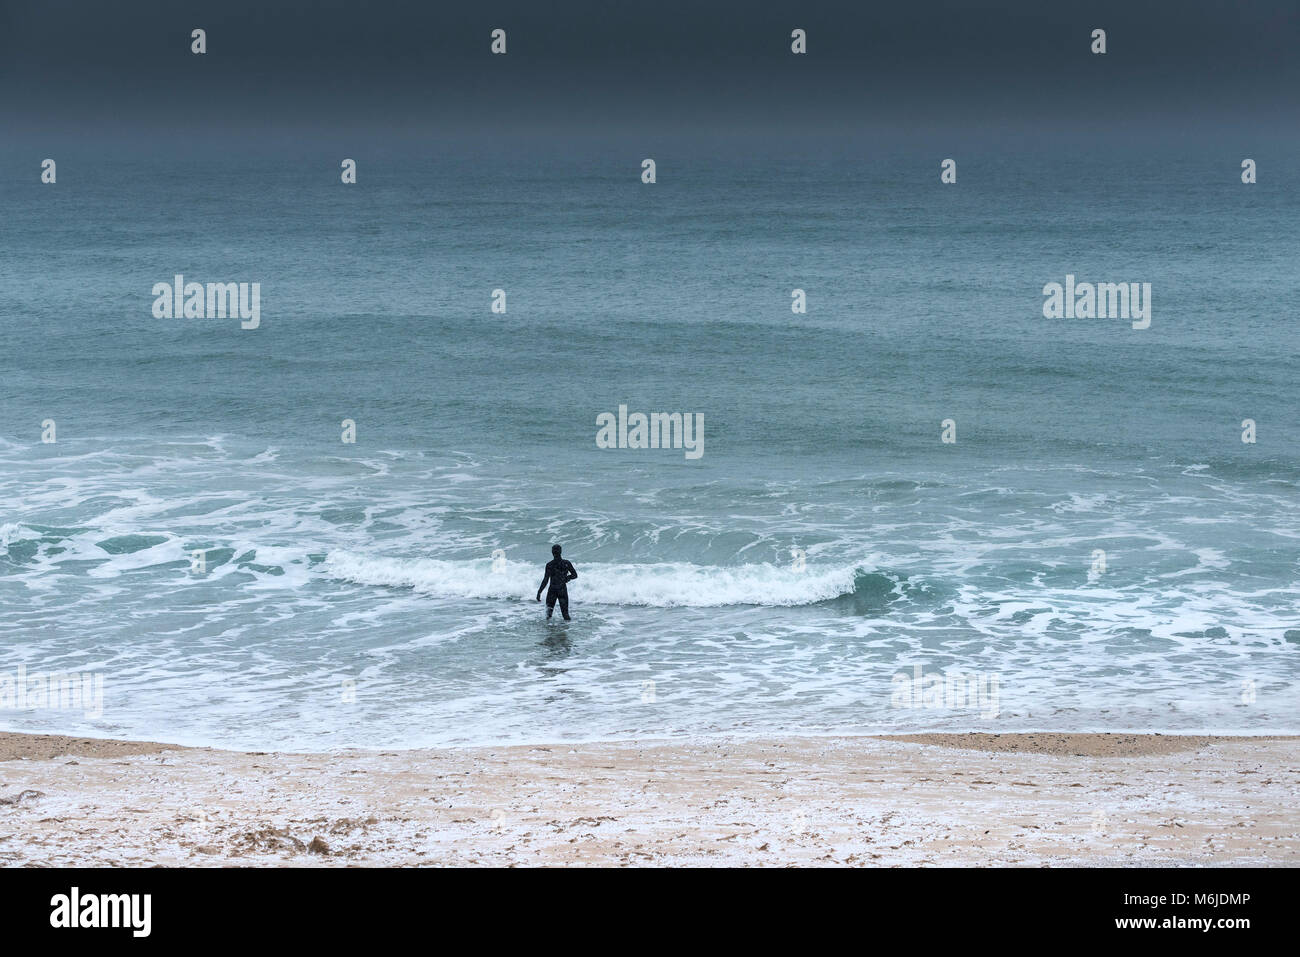 A figure in a wetsuit walking into the sea during freezing cold weather conditions. Stock Photo